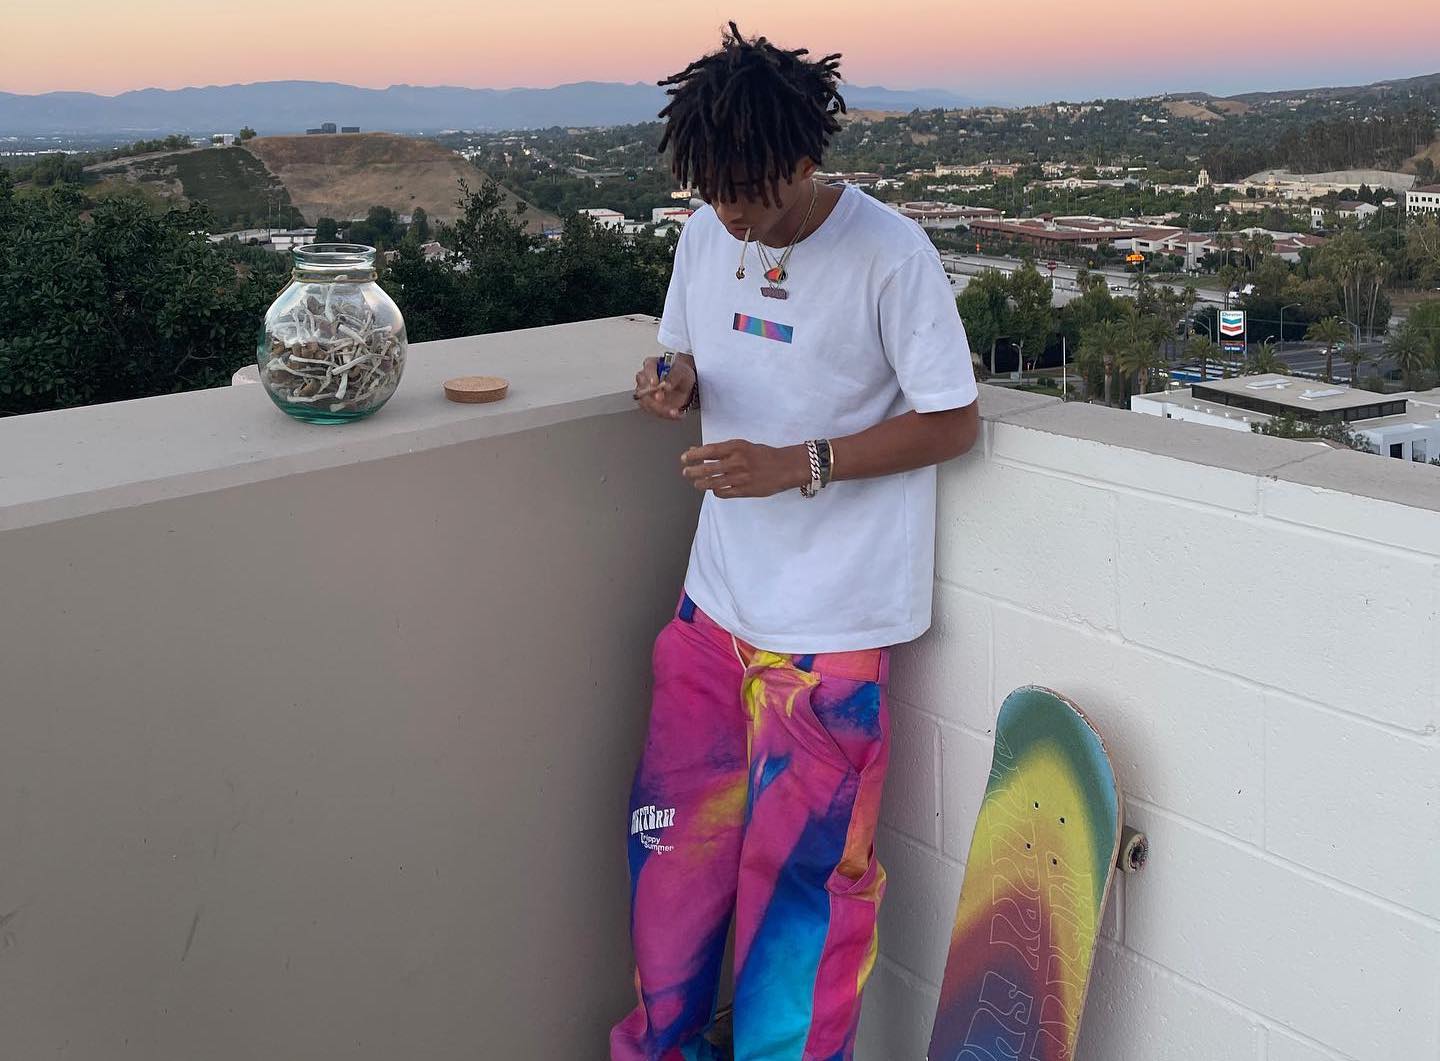 SPOTTED: Jaden Smith Celebrates his Birthday in MSFTSrep – PAUSE